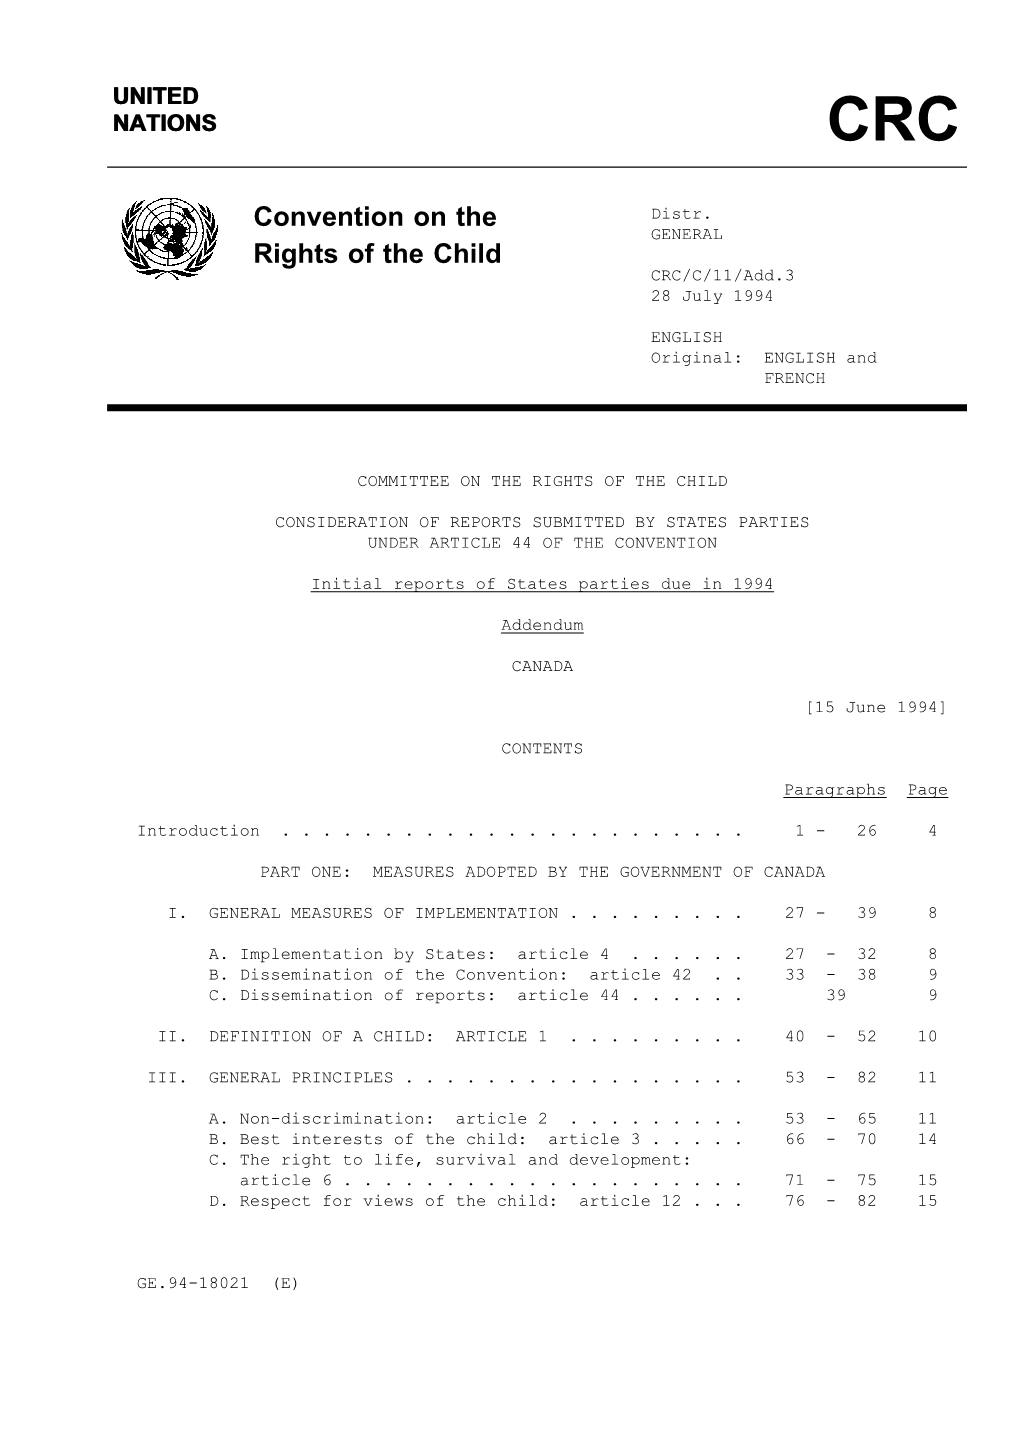 Convention on the Rights of the Child on 13 December 1991